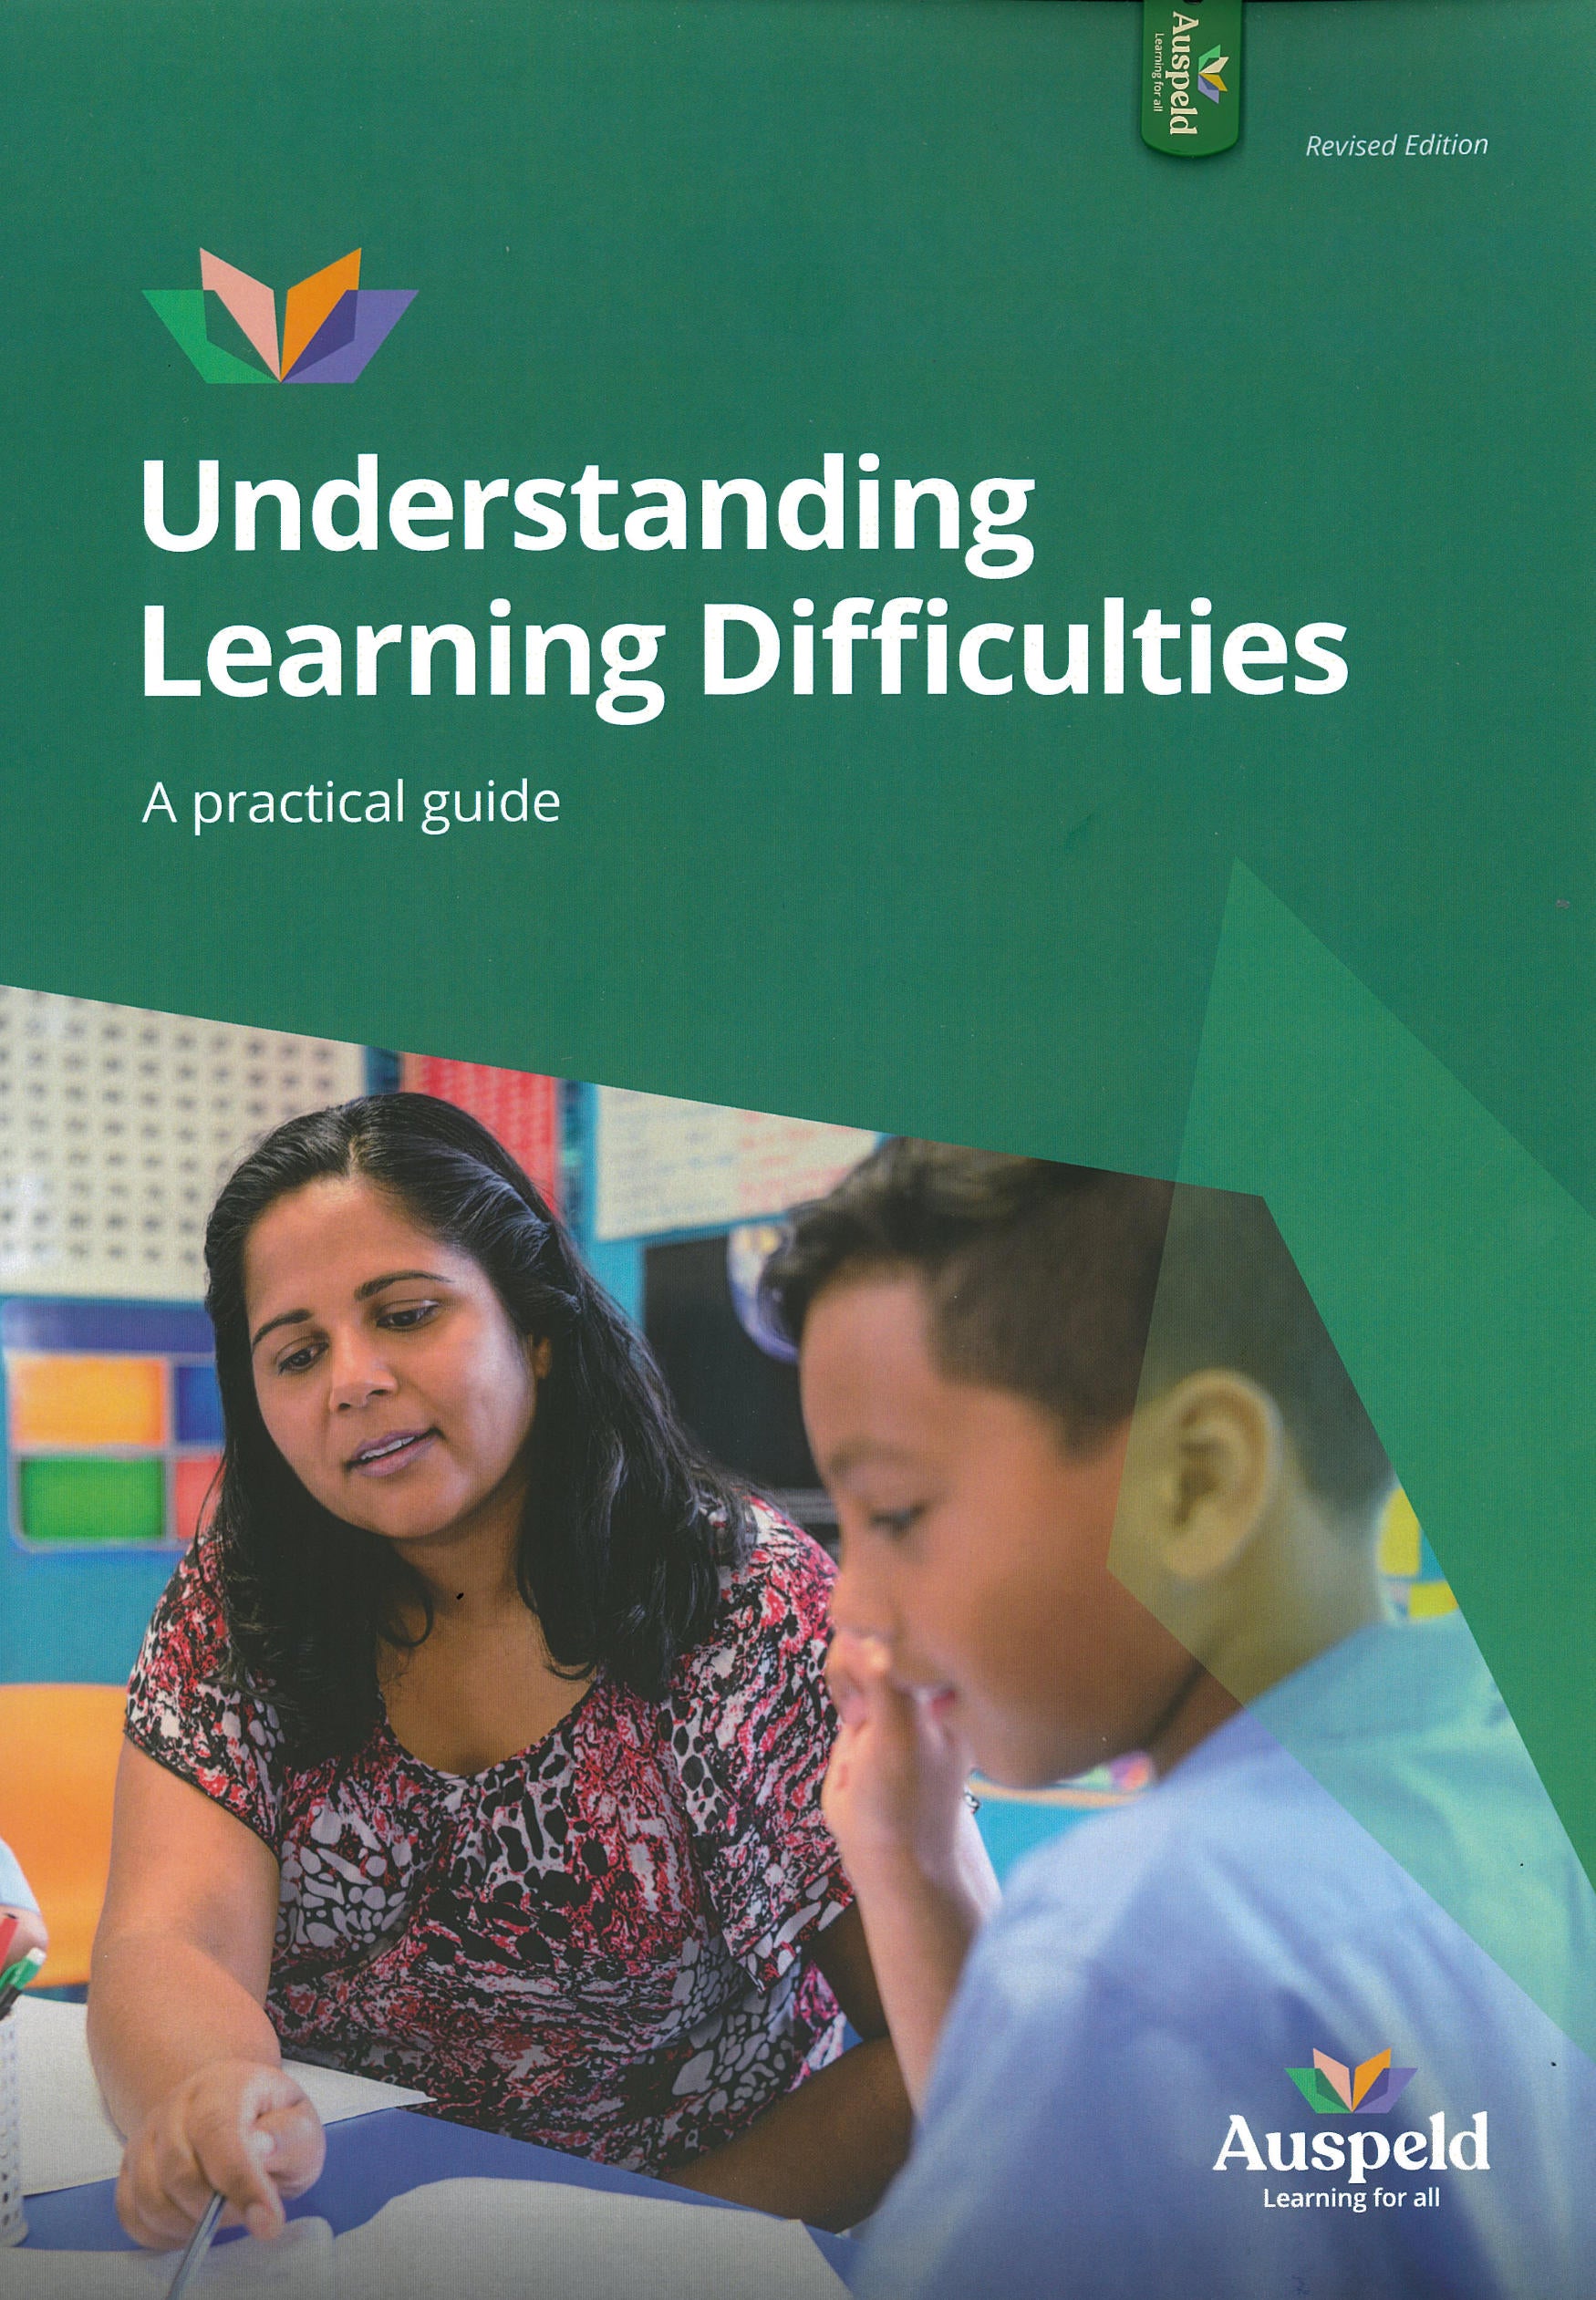 Understanding Learning Difficulties: A Practical Guide (Revised, 2021)